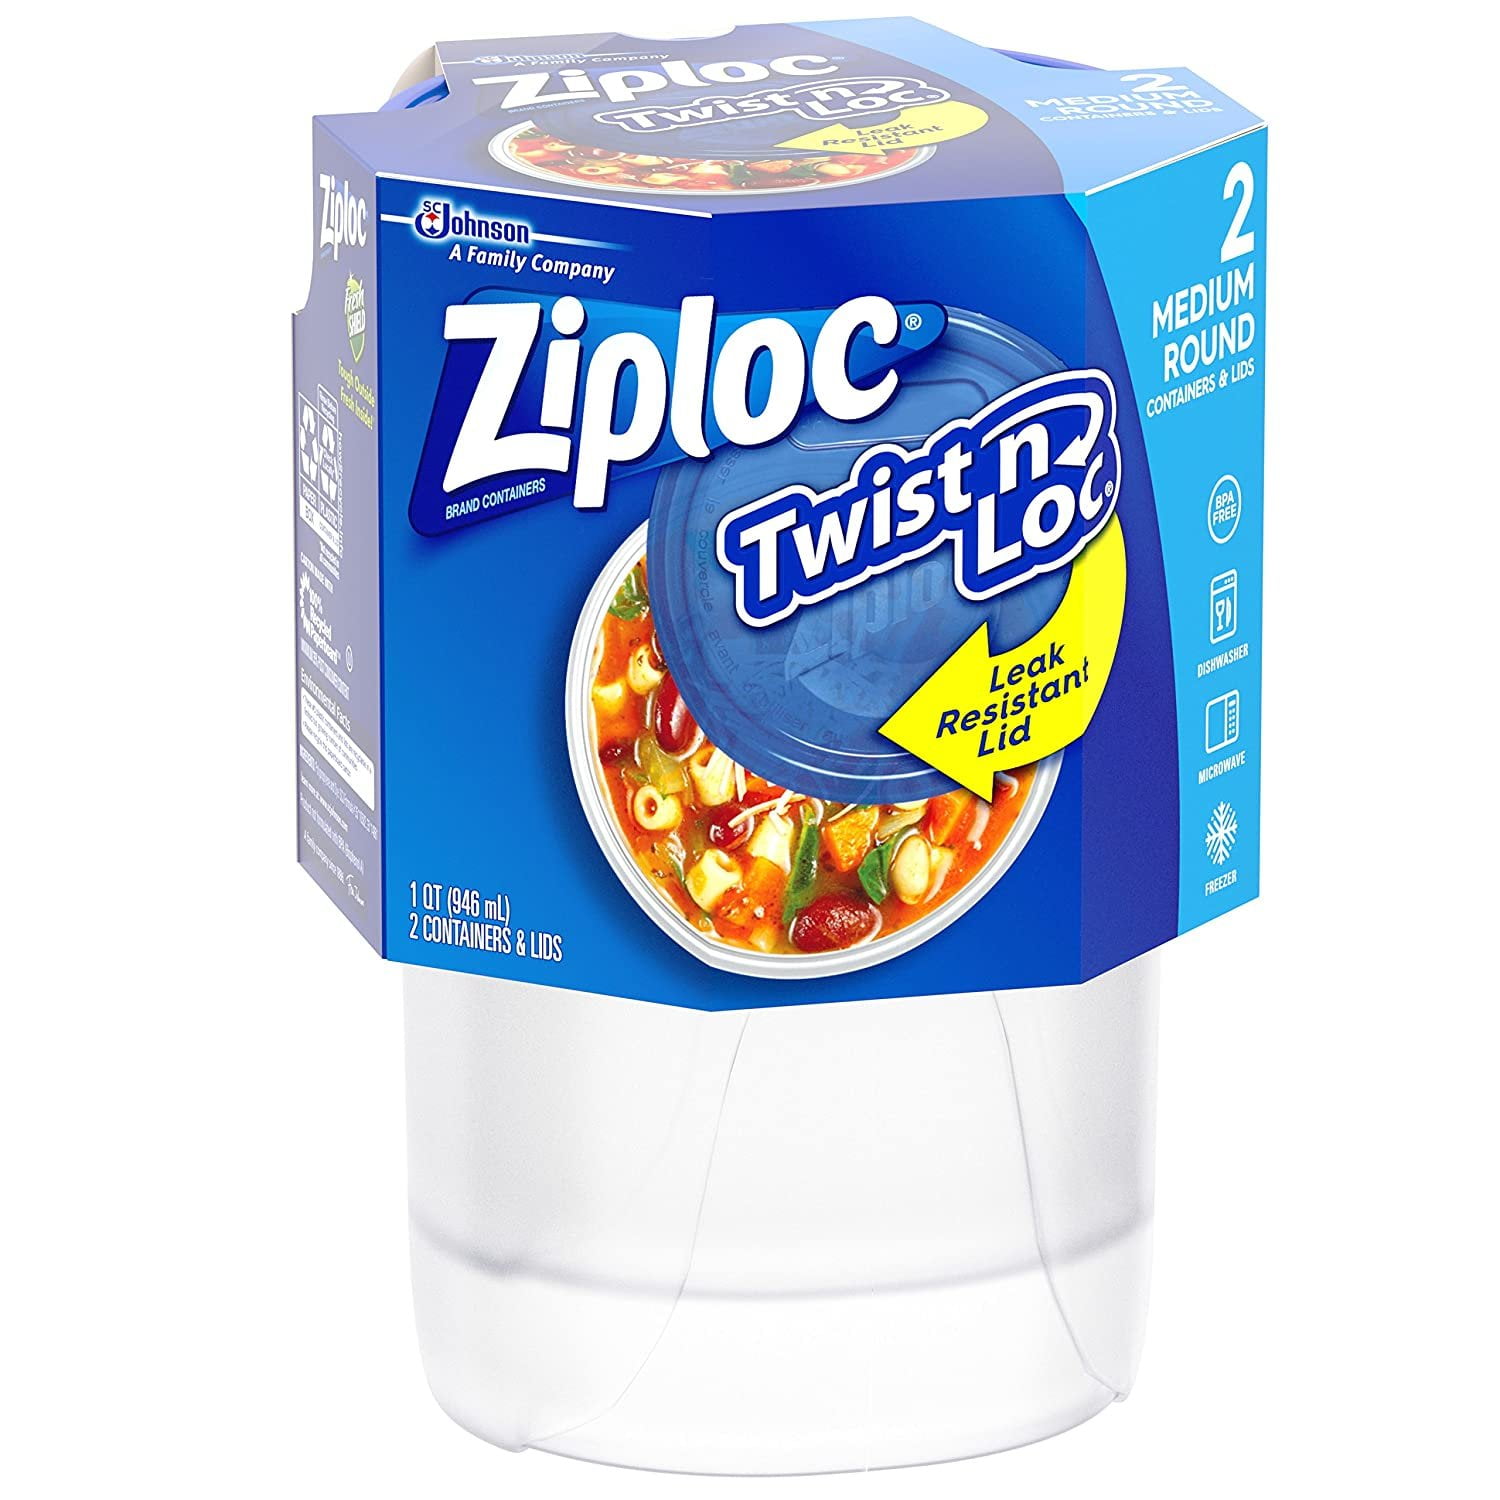 SC JOHNSON PROFESSIONAL, Ziploc Twist 'n Loc Round Food Containers, Colour:  Clear, Capacity: 473 ml